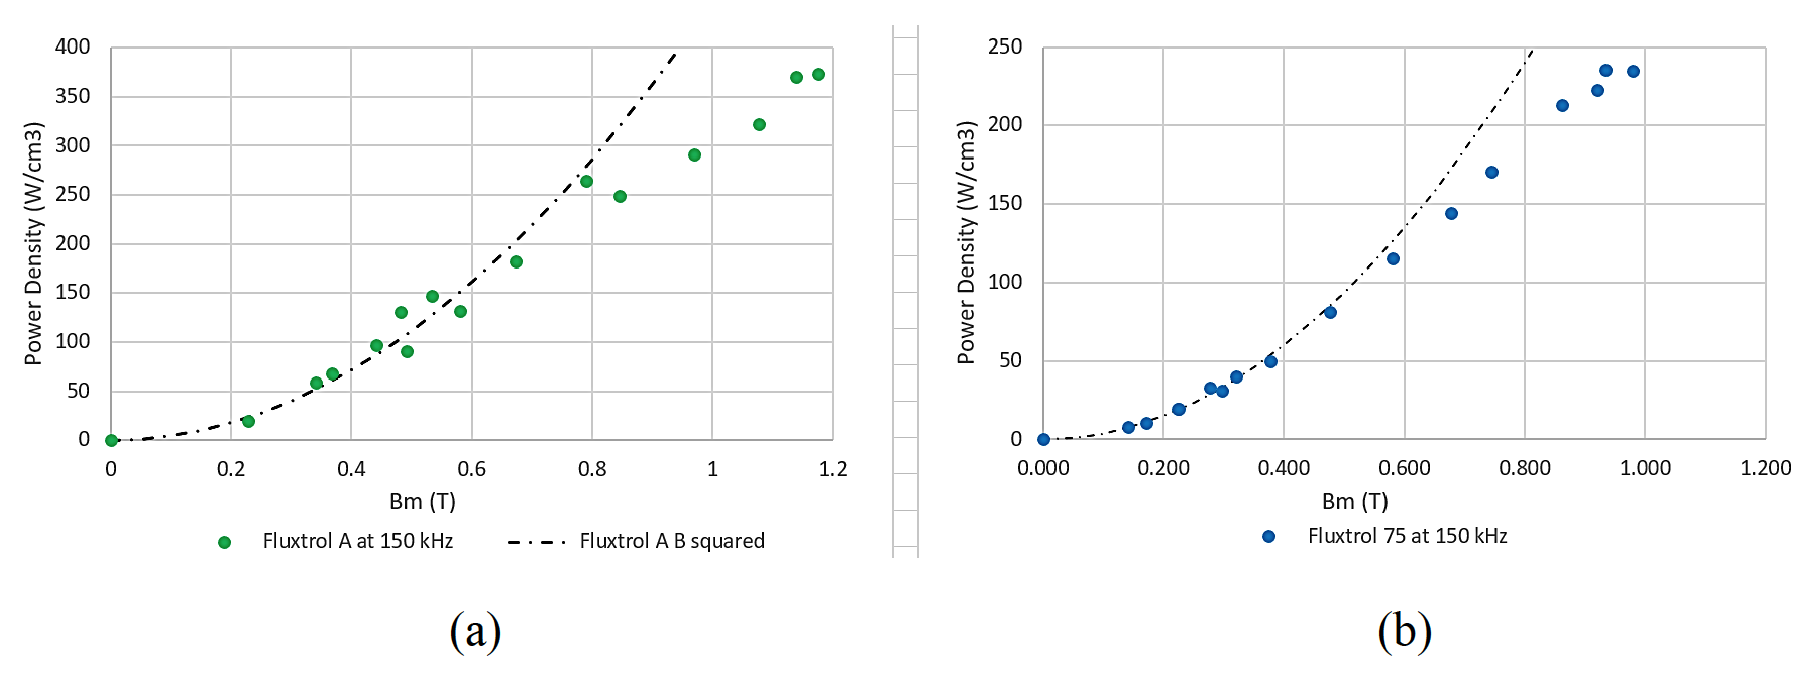 Fluxtrol | HES 2019 Magnetic Core Loss Behavior at High Fields in Magnetic Materials Figure 6 - Power density versus magnetic flux density for (a) Fluxtrol A and (b) Fluxtrol 75 at 150 kHz between 0 and 1.2 T and comparison to the Steinmetz model with B exponent 2.0.